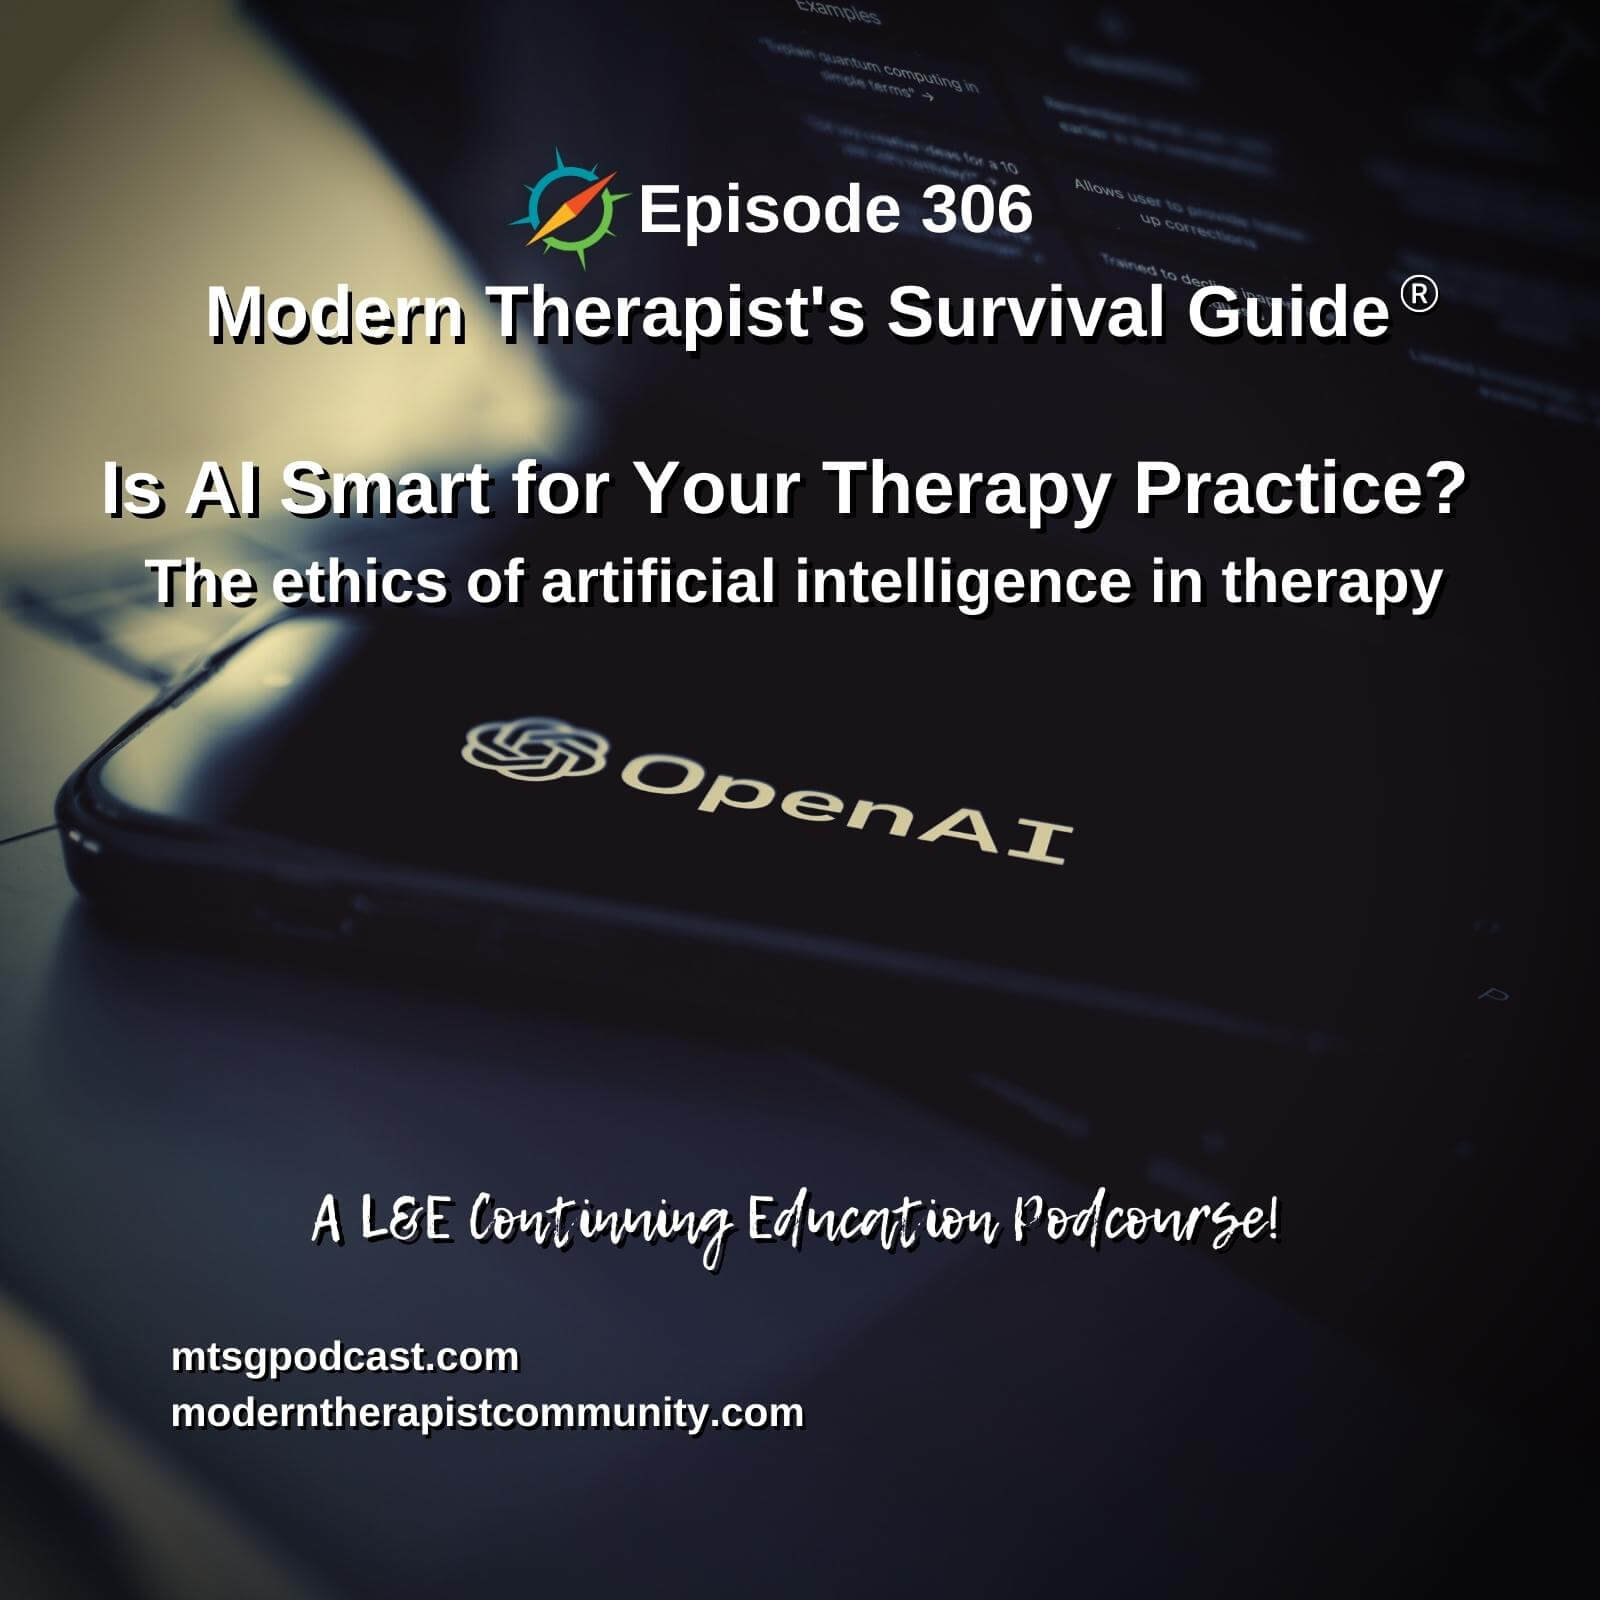 Photo ID: A mobile phone with the logo for OpenAI on the screen sitting on an open laptop with text overlay "Episode 306: Is AI Smart for Your Therapy Practice? The ethics of artificial intelligence in therapy"